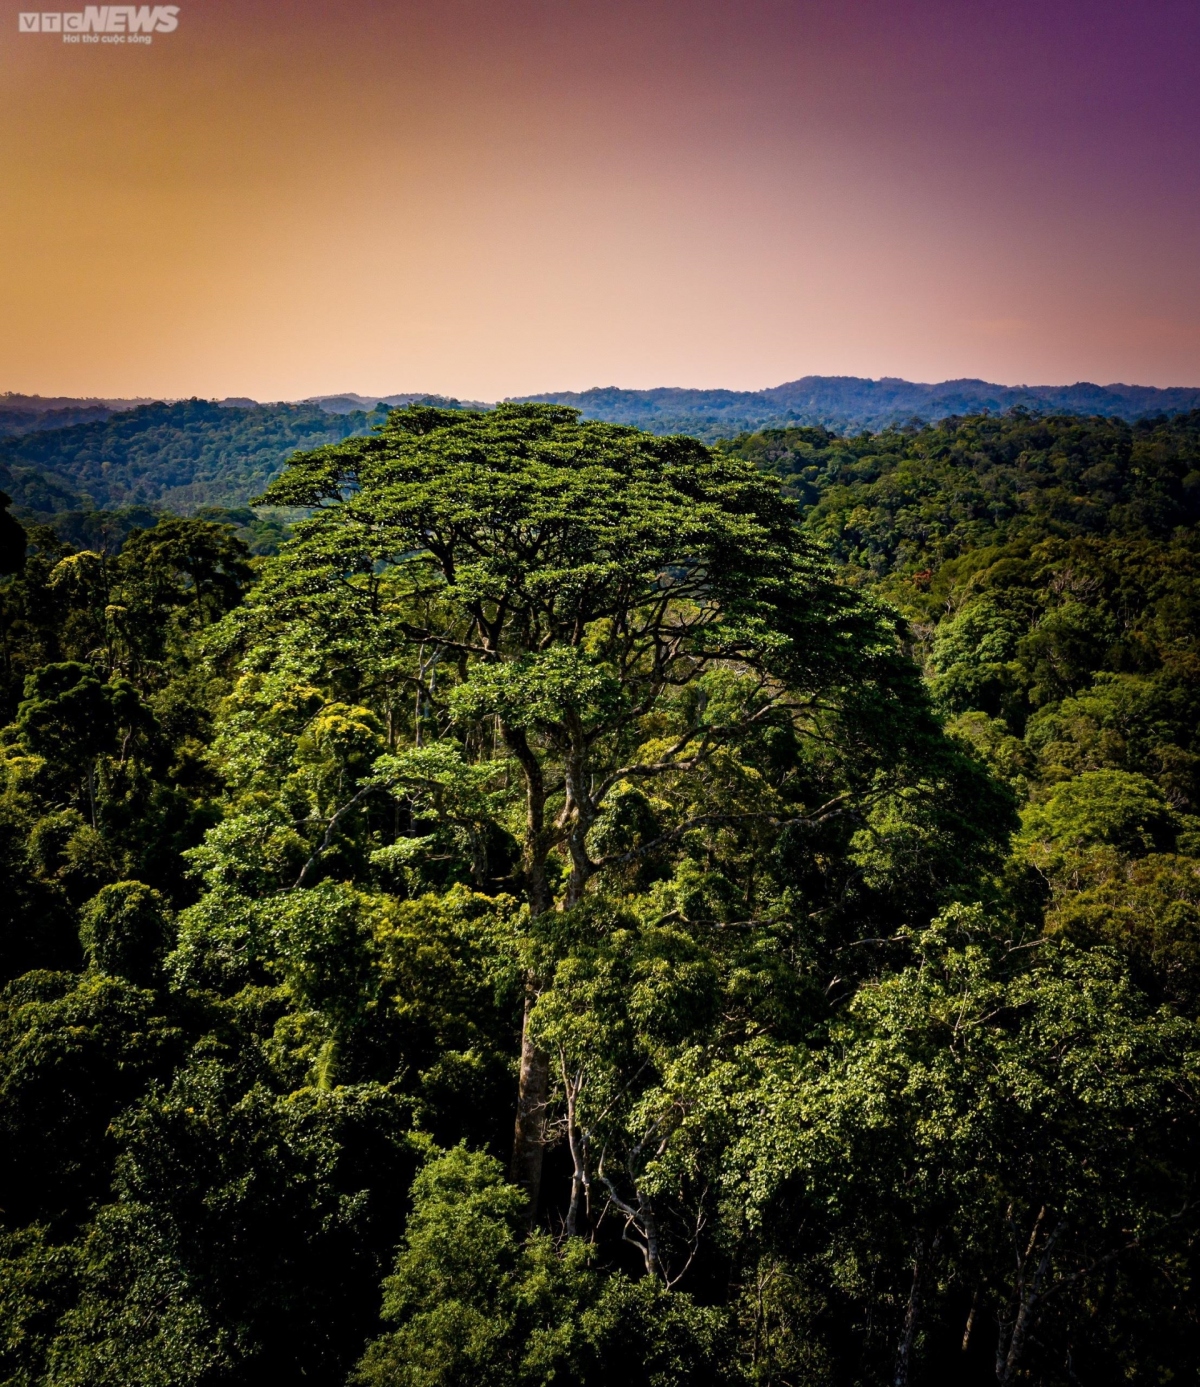 The primeval forests provide An Lao with fresh and cool air all year round.